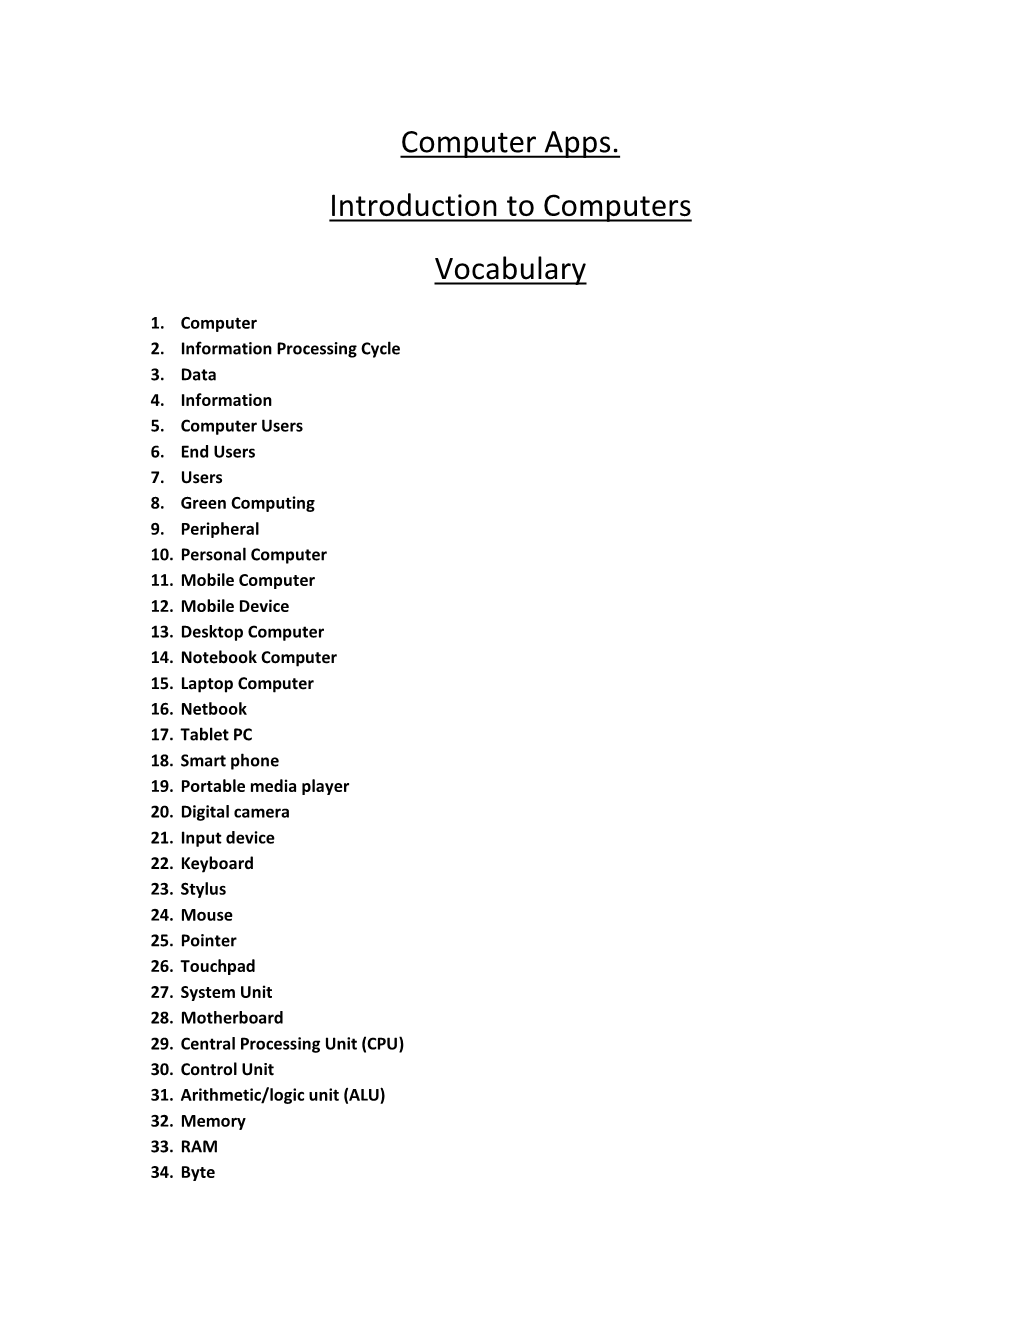 Computer Apps. Introduction to Computers Vocabulary